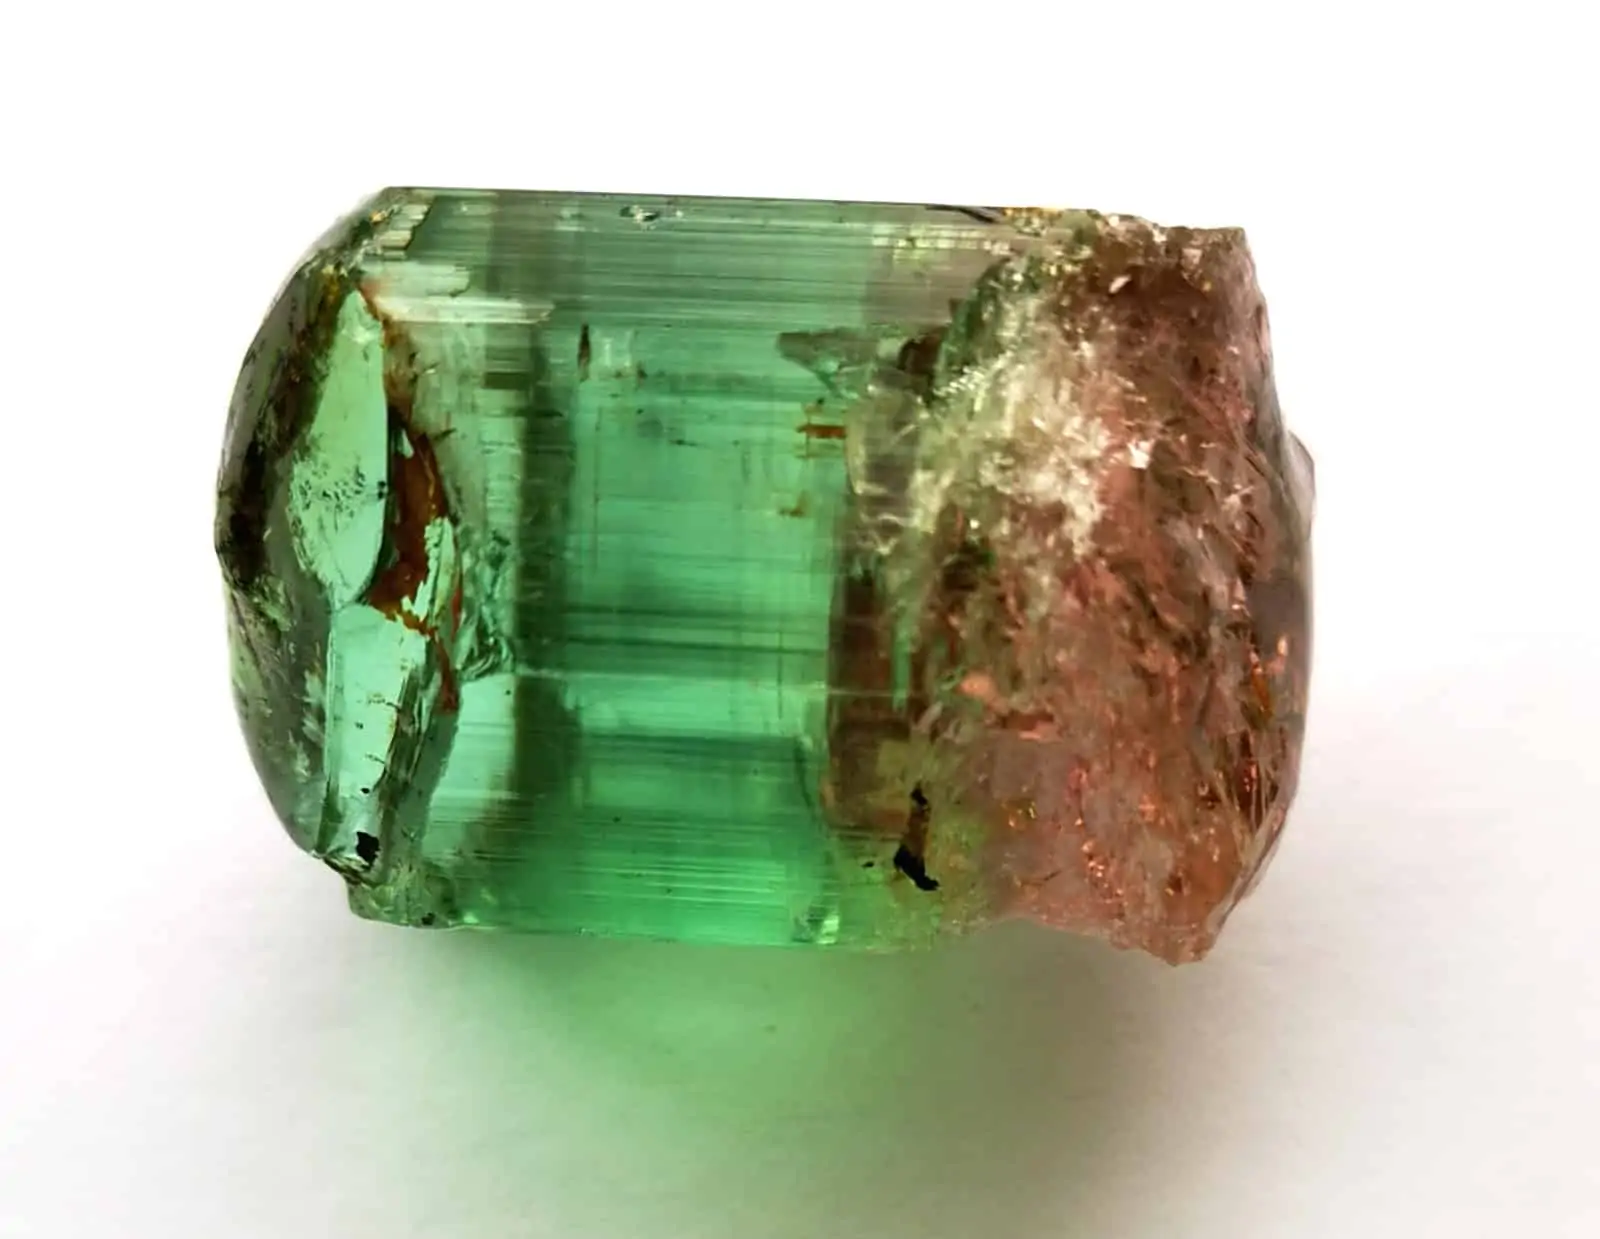 Rough tourmaline later cut into stones listed on Gembridge